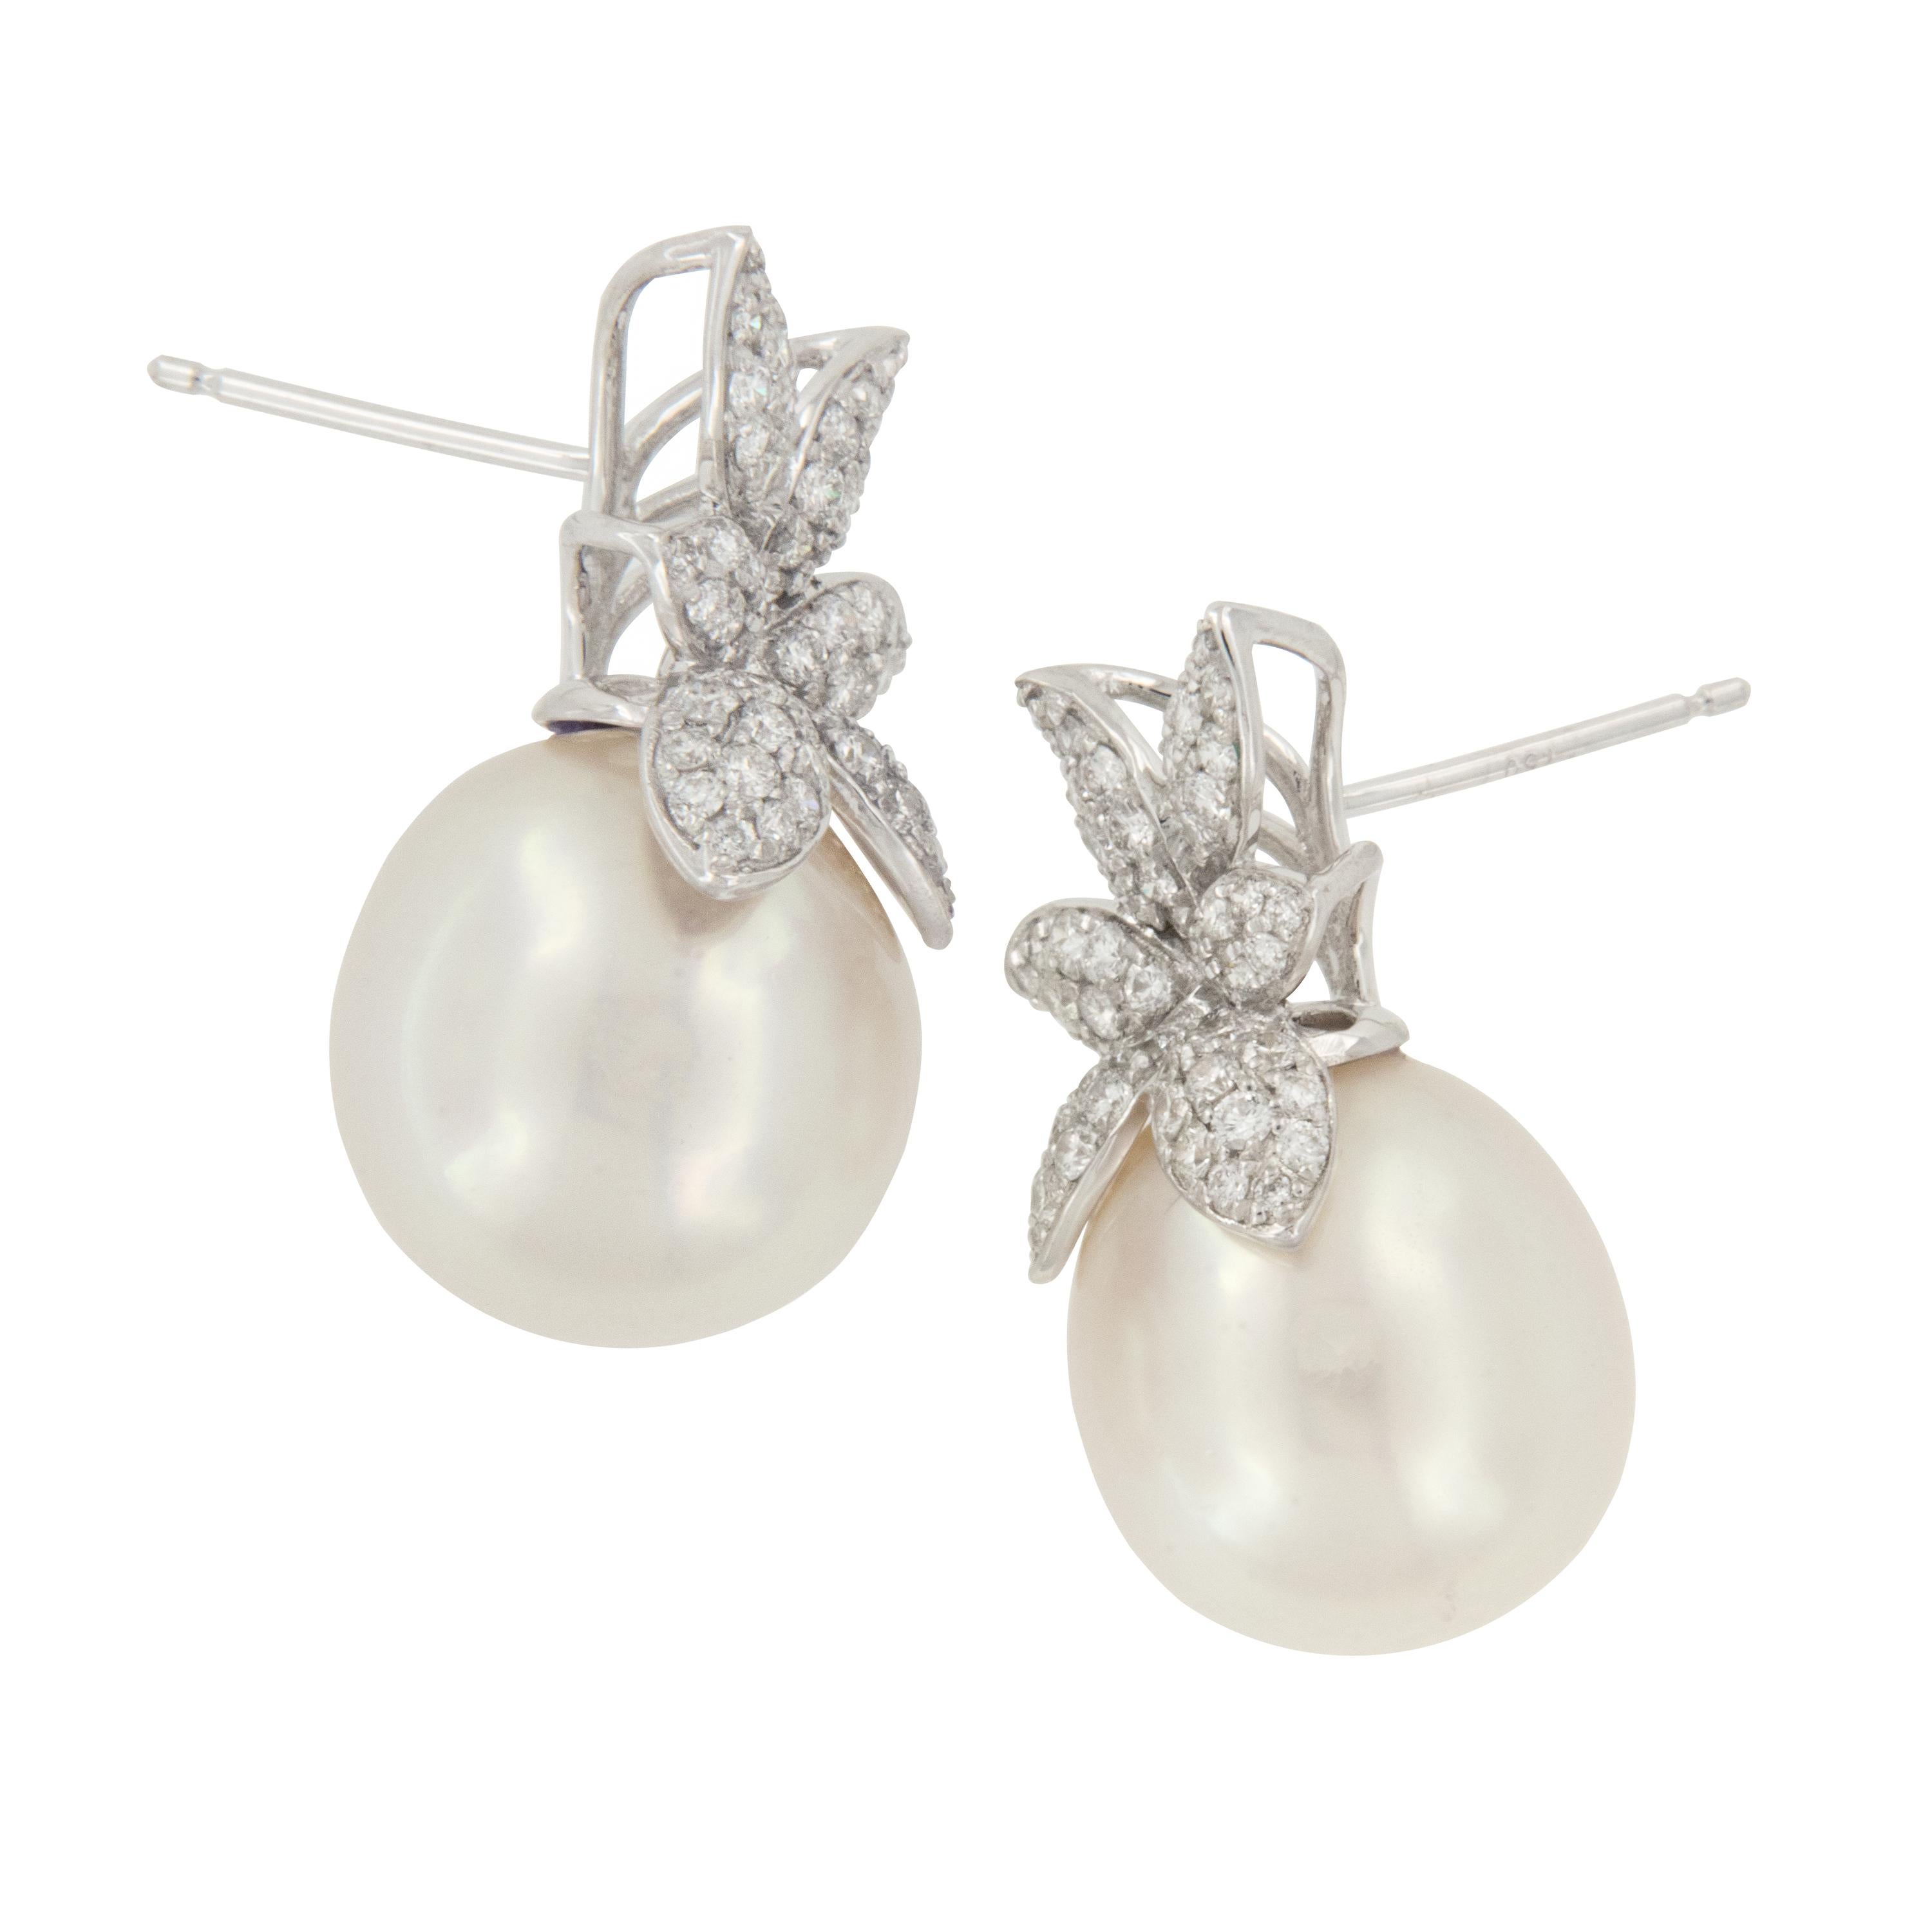 These elegant floral designed earrings with lustrous white South Sea pearls make any occasion special! Crafted in royal 18 karat white gold, these earrings are pave' set with 124 diamonds = 1.03 Cttw.  and are show stoppers on your ears!